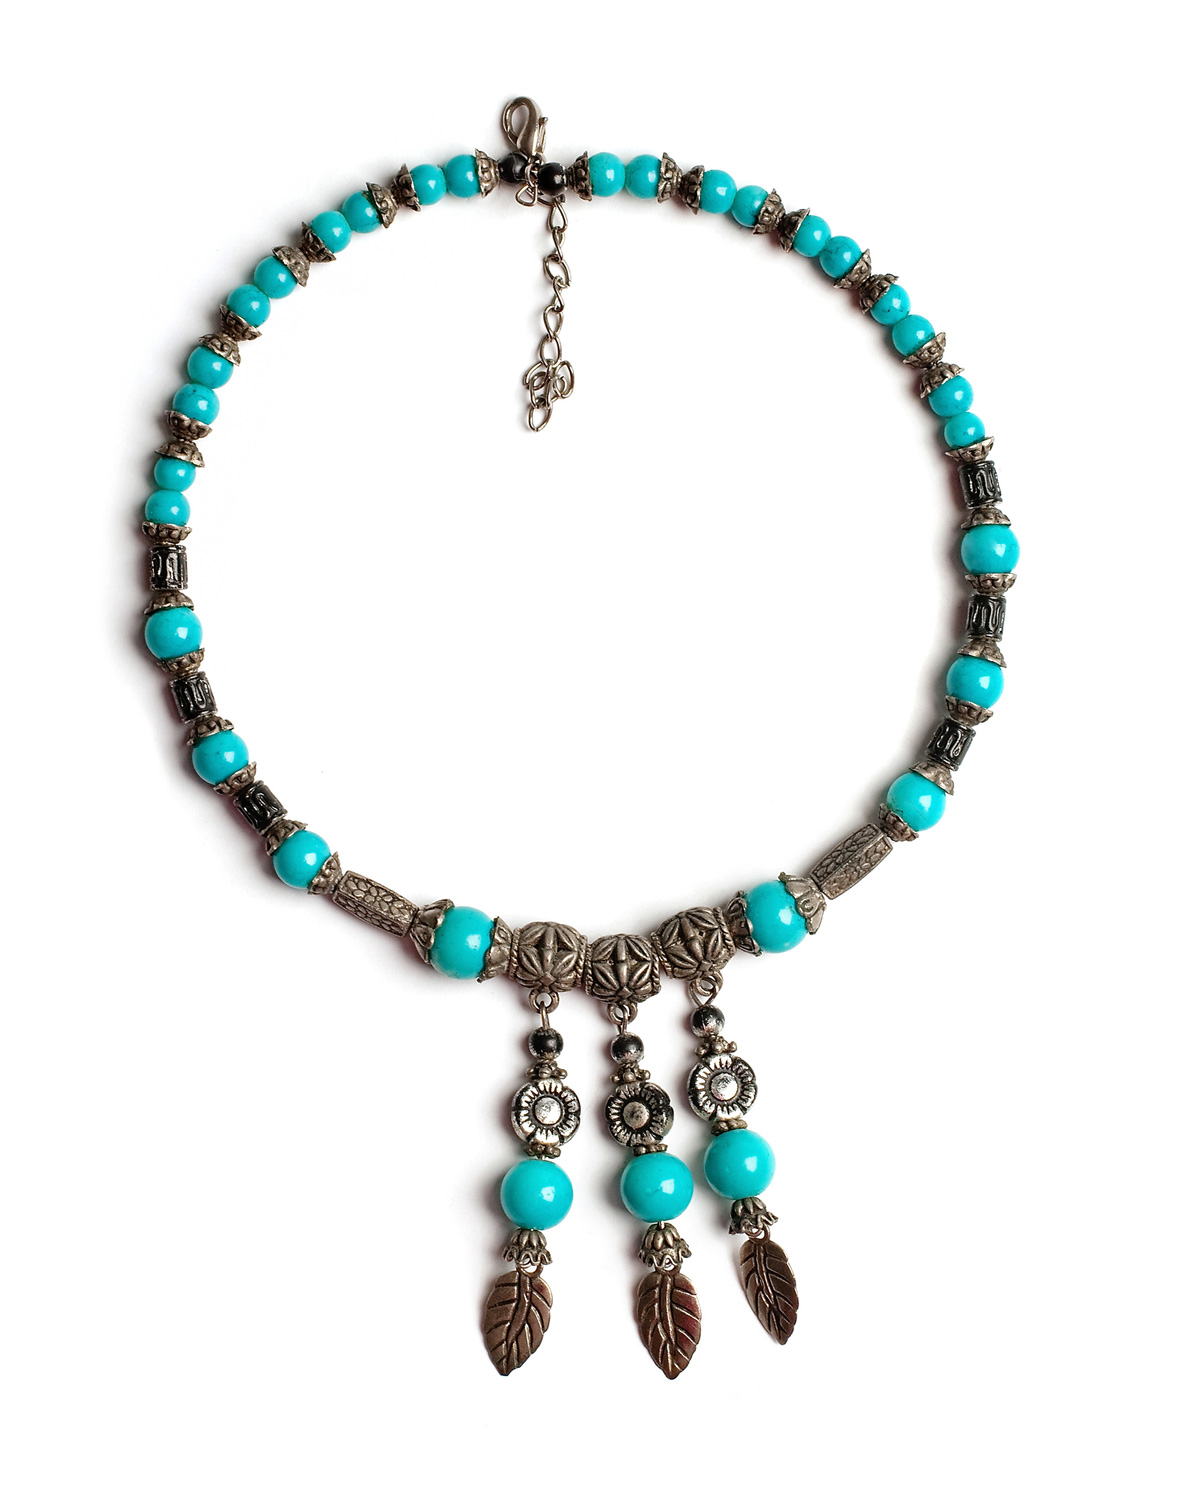 With Precious Elements Turquoise Purchasers you can now trade your native american jewelry online for cash and it has never been easier, visit our Arizona location in person if you live in Chandler Phoenix Gilbert Scottsdale Mesa Glendale Maricopa Tucson Casa Grande Payson Prescott Flagstaff Cave Creek or Sun City AZ | native american and more with our purchasers, turquoise, amber silver and more | We specialize in turquoise